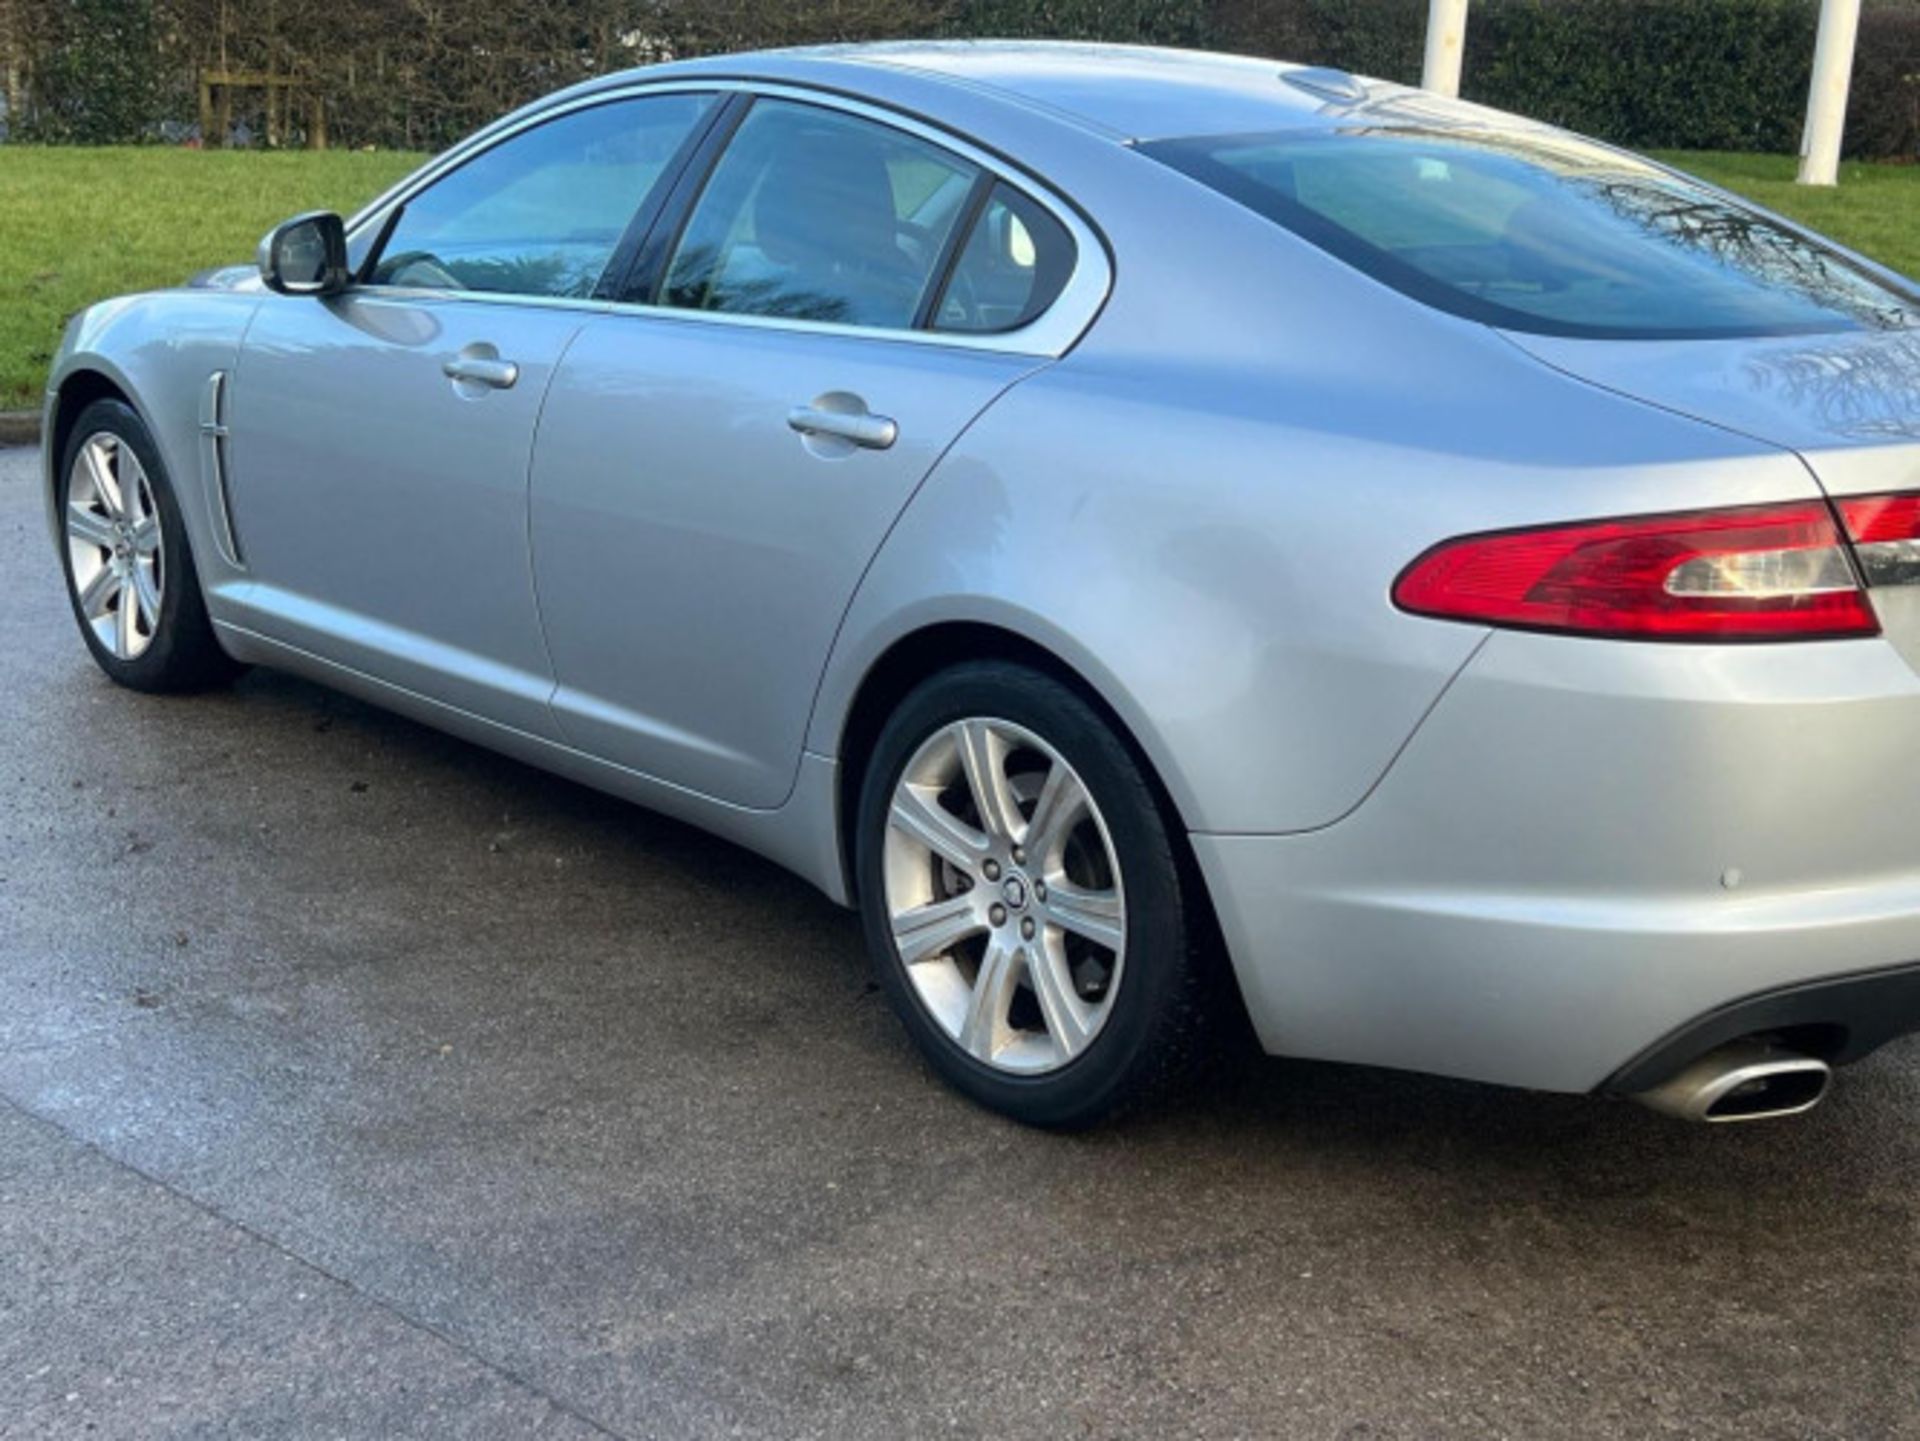 LUXURIOUS JAGUAR XF 3.0D V6 LUXURY 4DR AUTOMATIC SALOON >>--NO VAT ON HAMMER--<< - Image 73 of 80